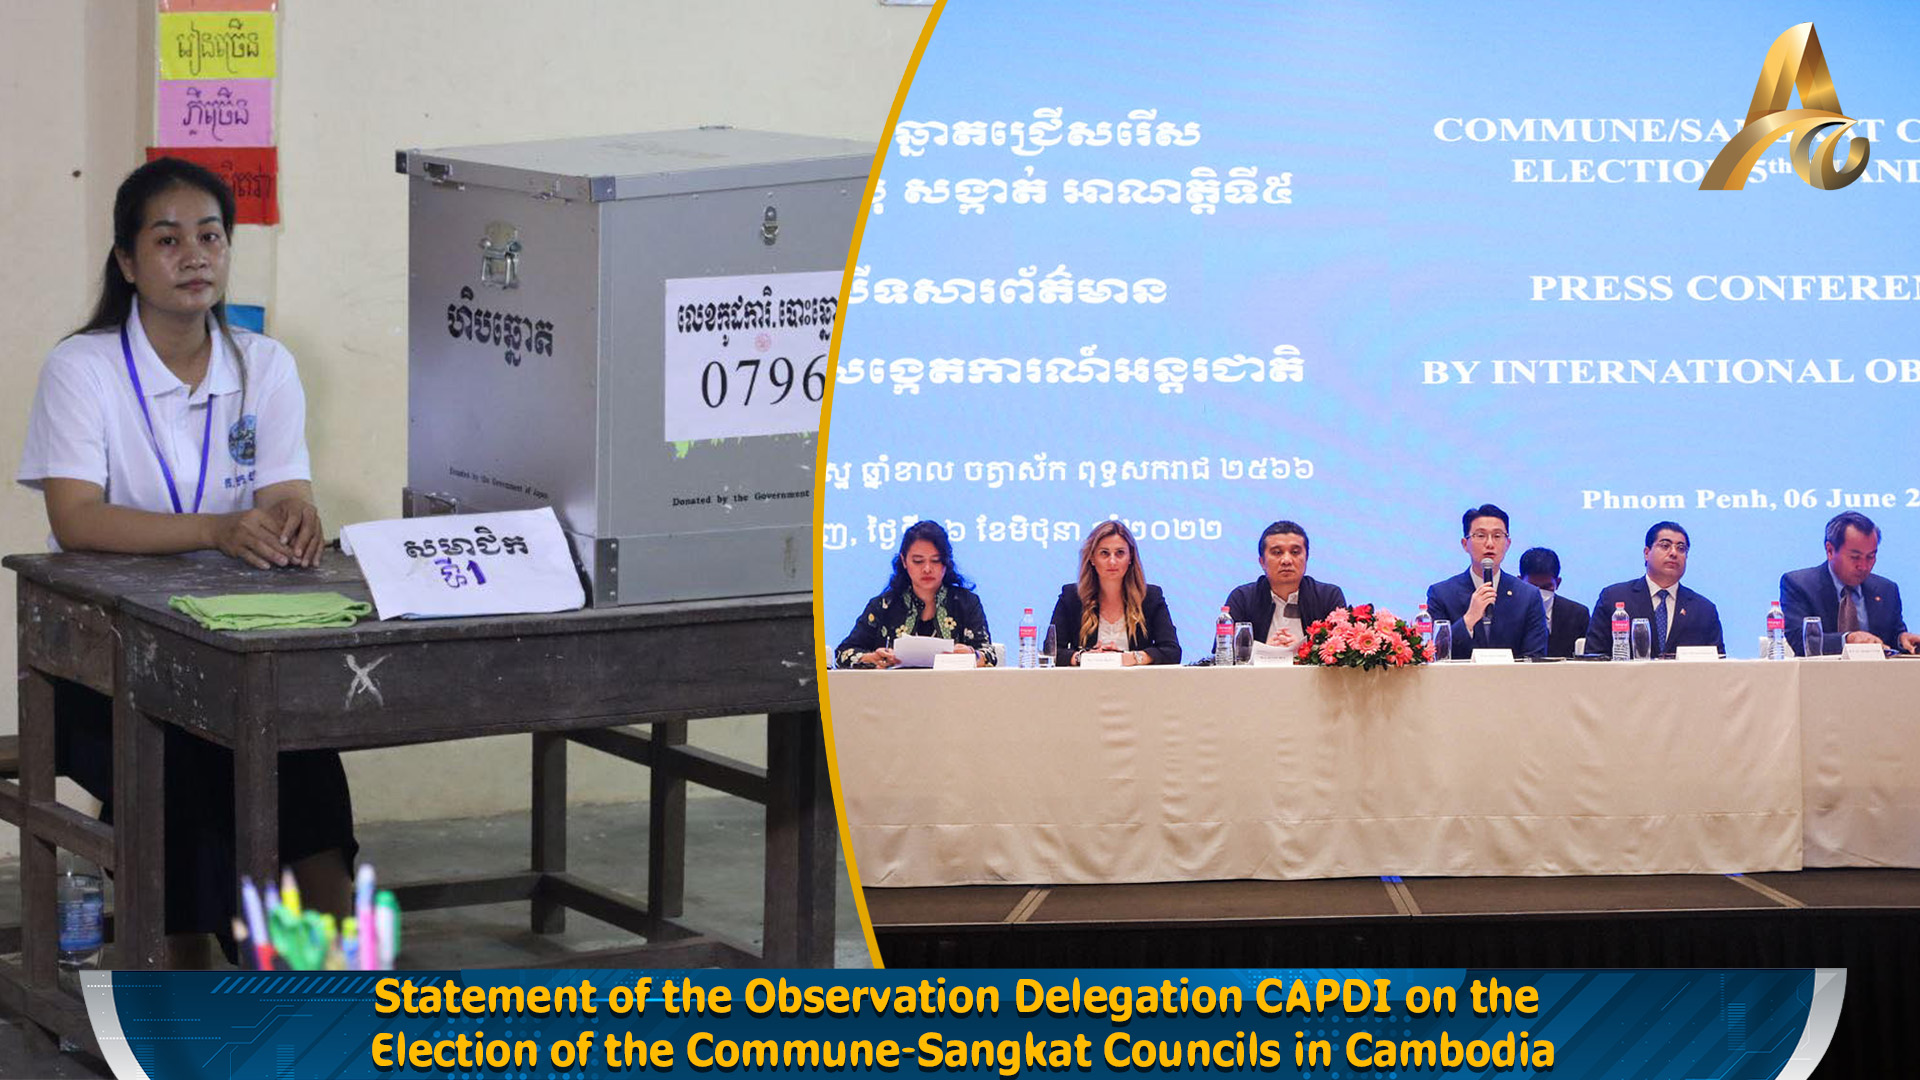 Statement of the Observation Delegation CAPDI on the Election of the Commune-Sangkat Councils in Cambodia